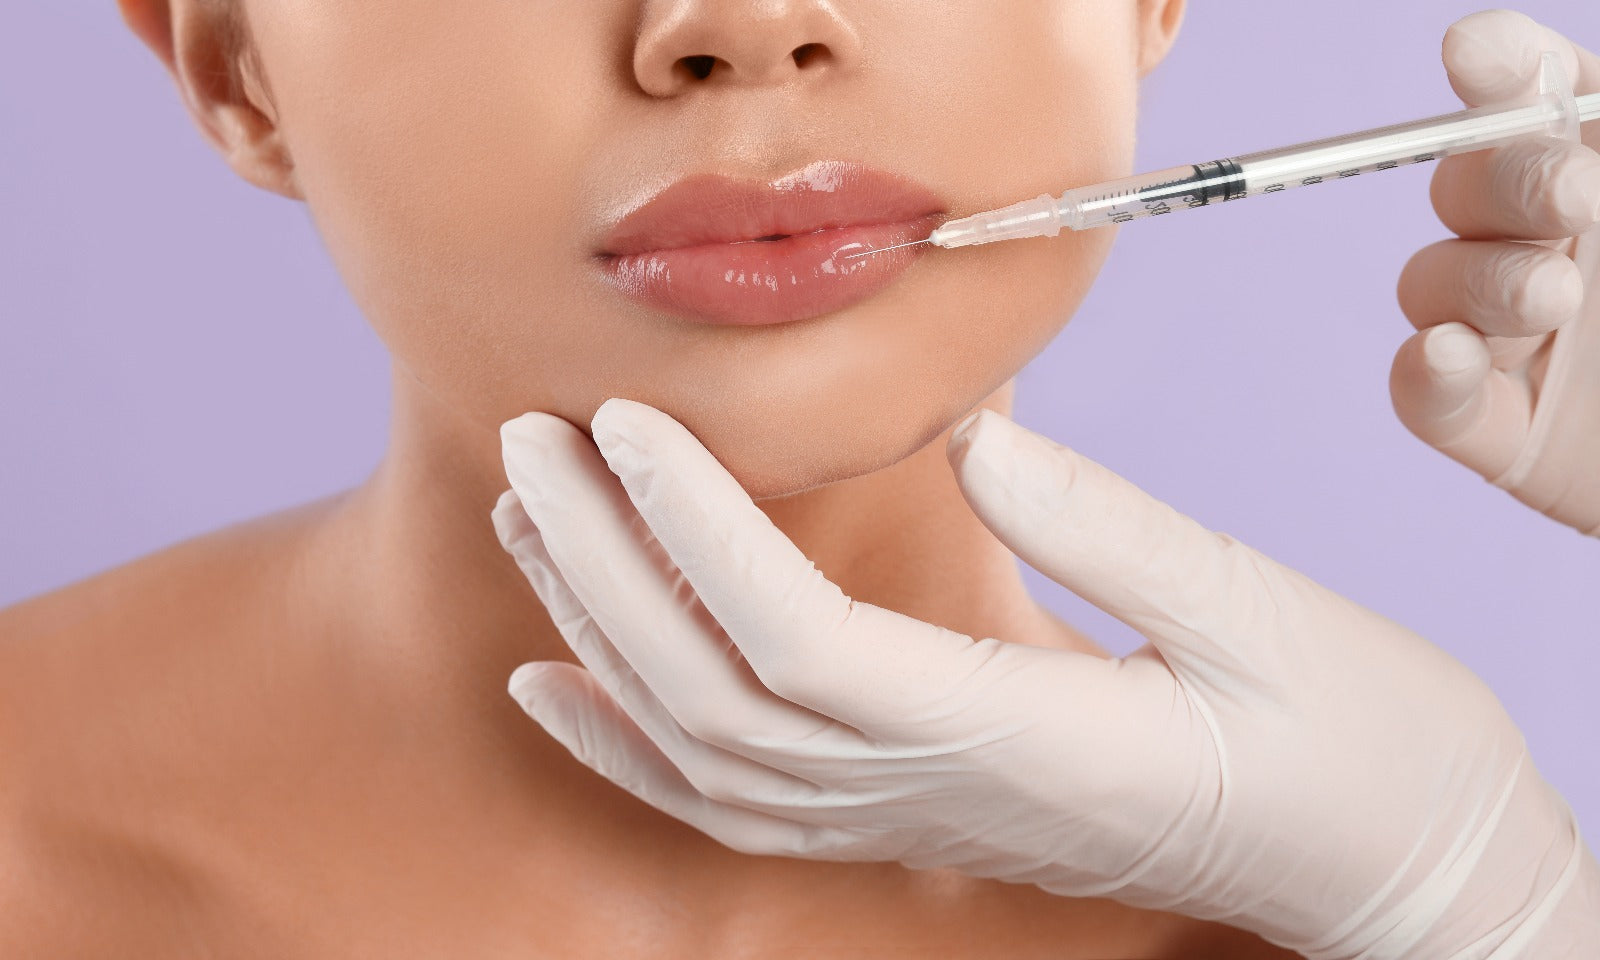 A Comparison of Lip Fillers and Lip Injections: What are the Side Effects and Risks?